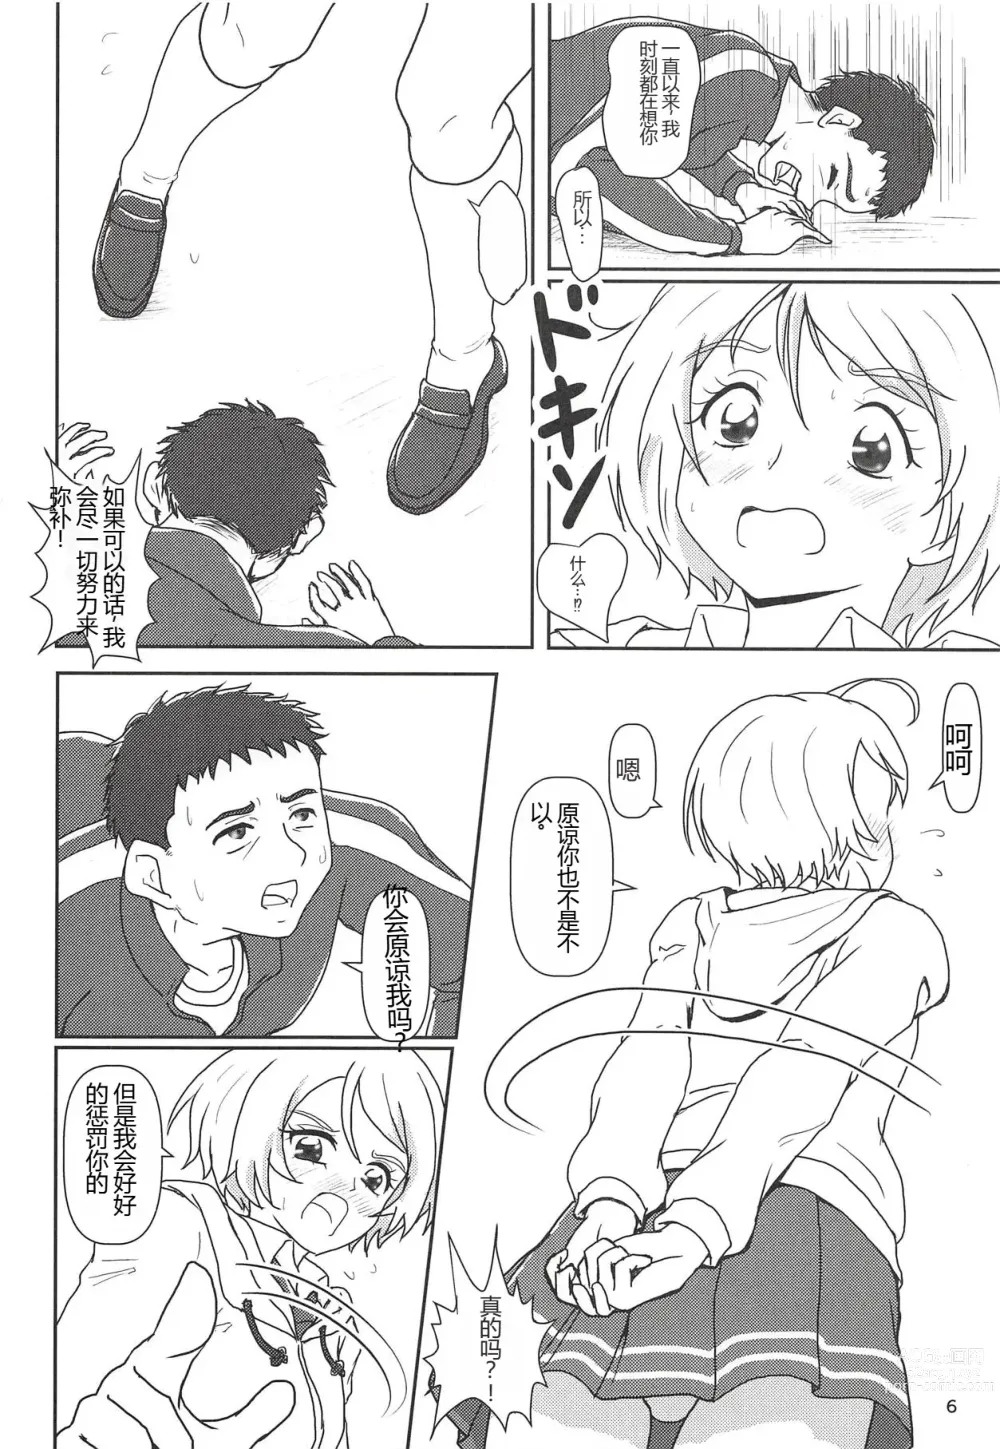 Page 5 of doujinshi Hugtto! Zuricure